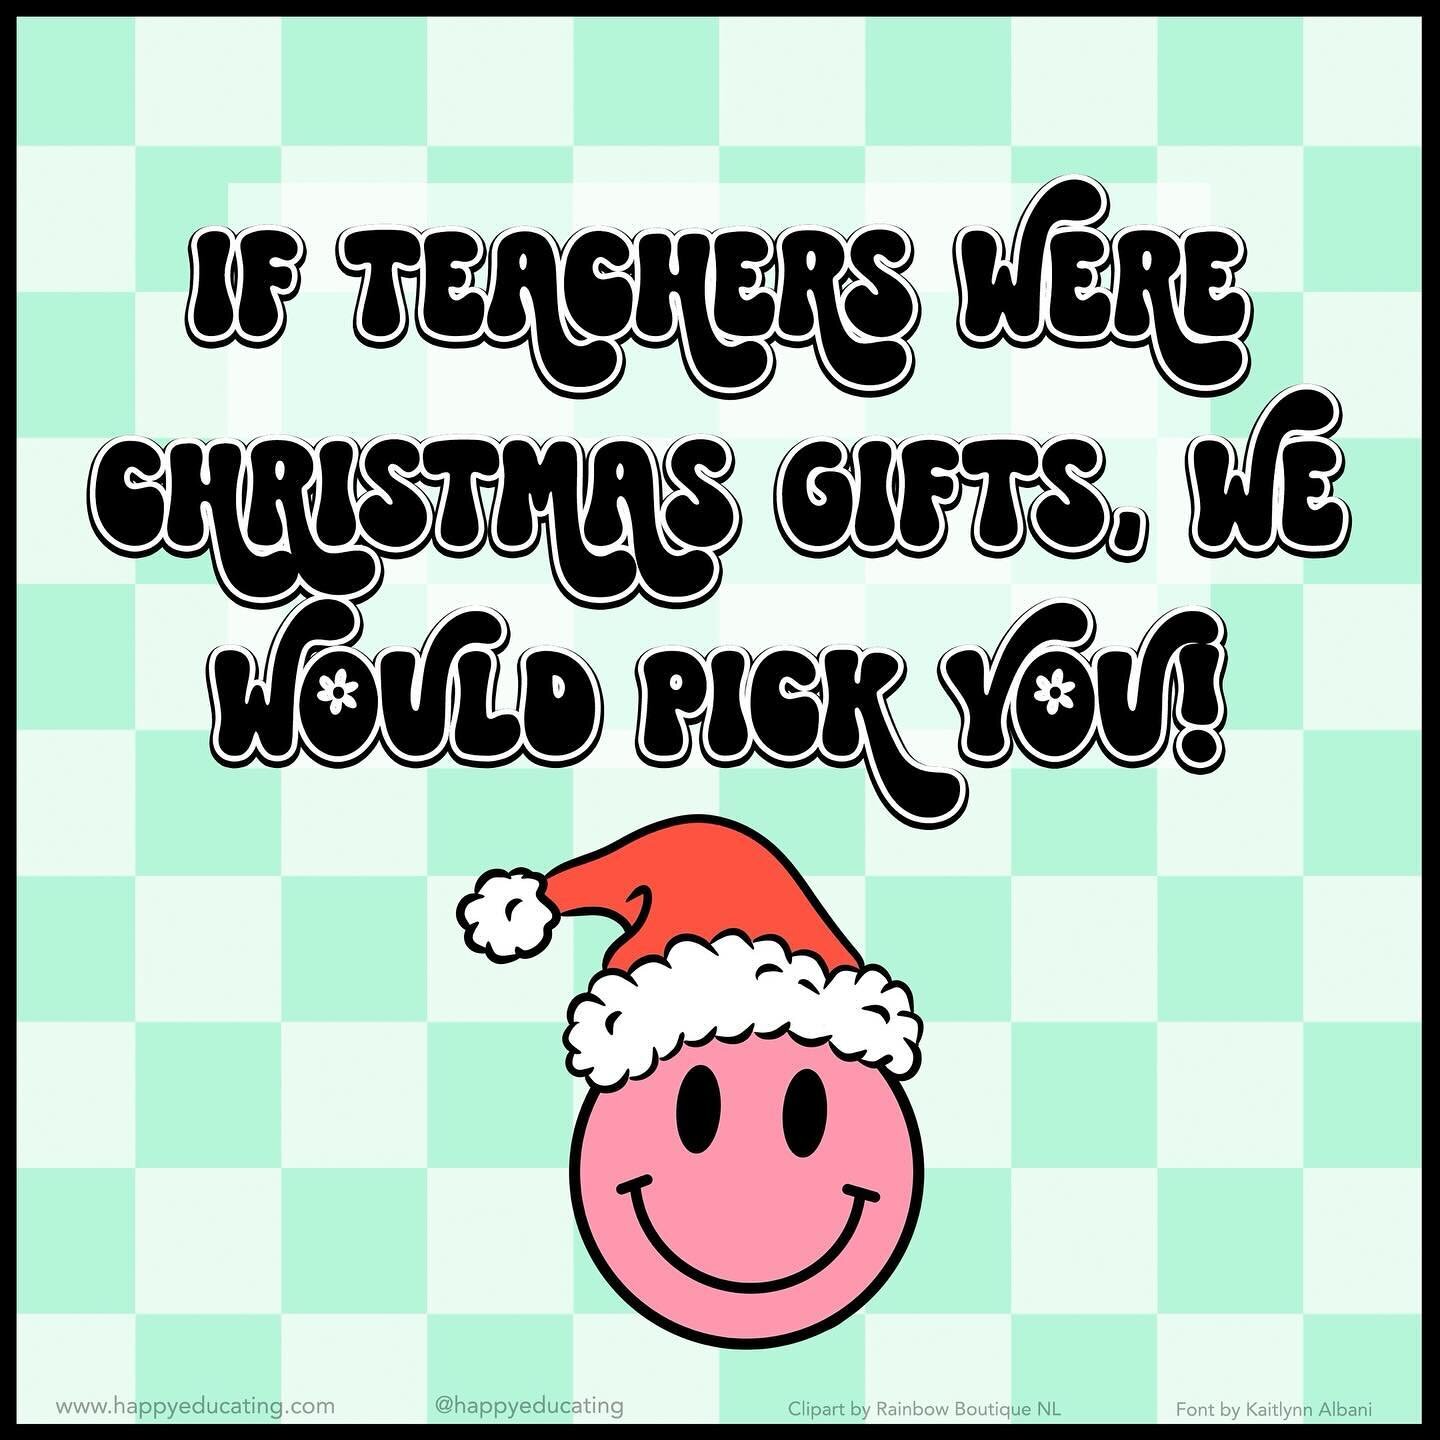 Teachers, you&rsquo;re the gift that keeps on giving! 💝 Your dedication, passion, and tireless efforts make every day feel like Christmas in the classroom.🎄 Let&rsquo;s celebrate the amazing educators who unwrap the potential in every student. Tag 